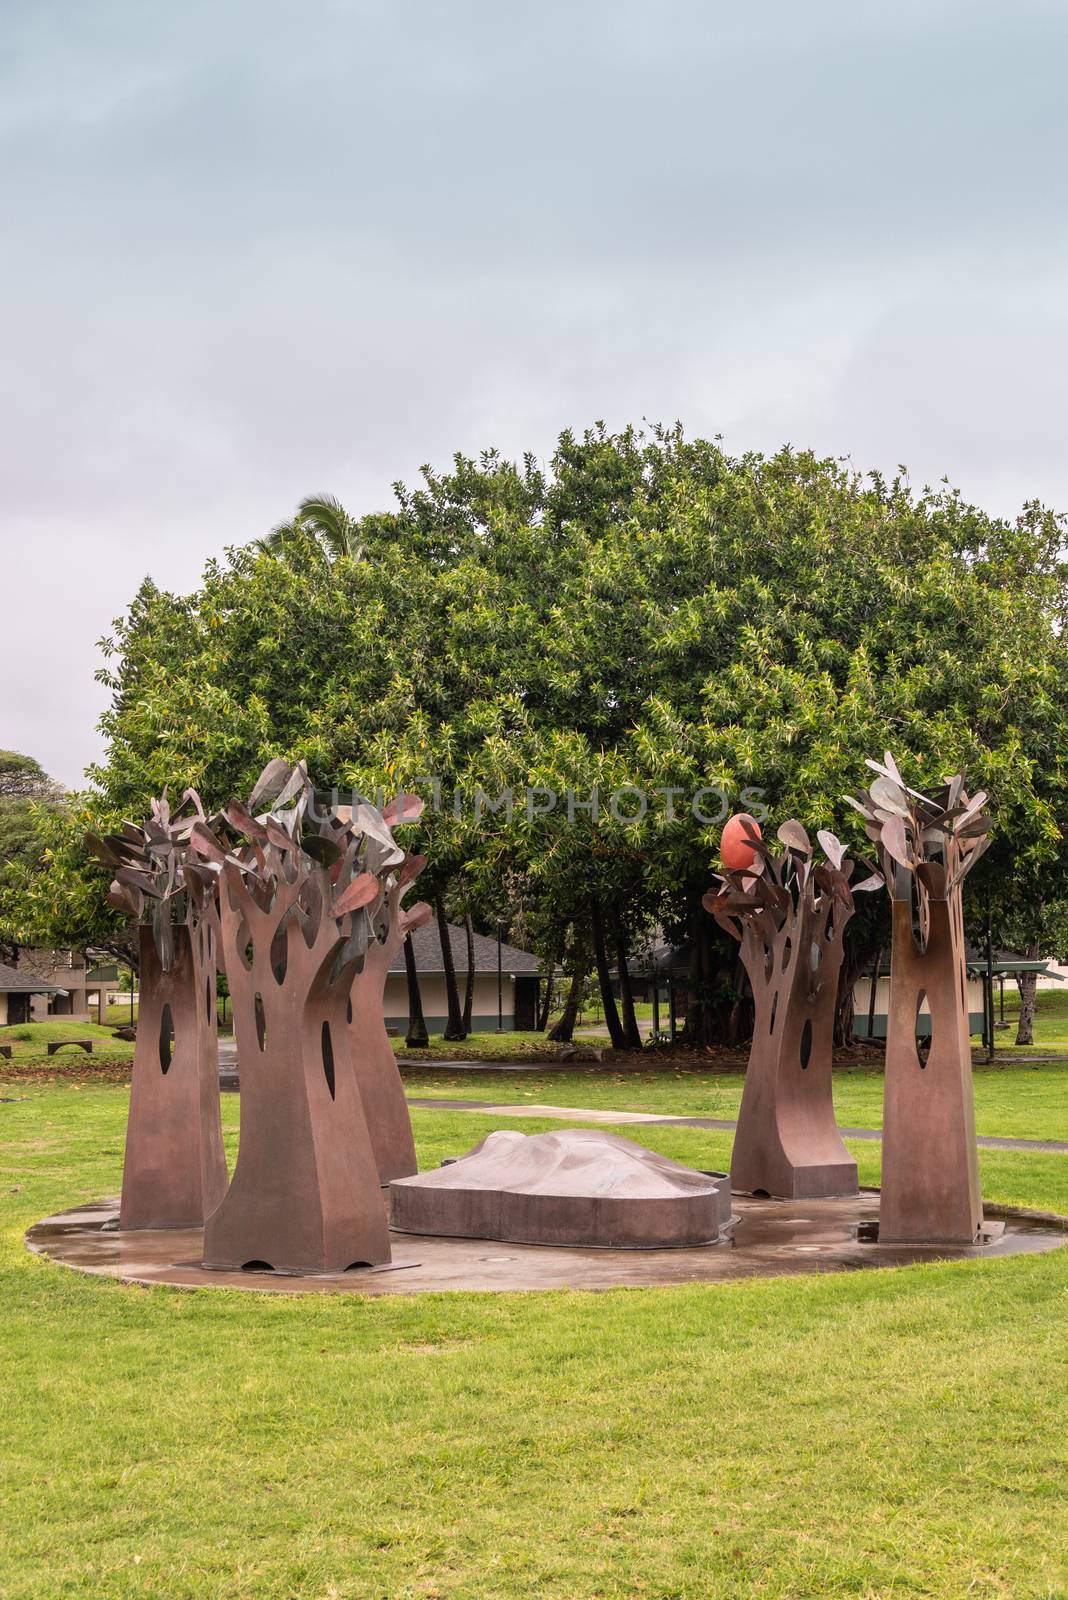 Kahului, Maui,, Hawaii, USA. - January 12, 2020: Portrait of Brown rusty metal group of trees statue on green lawn at University of Hawaii, Maui college campus. Gray cloudy sky. Green foliage in back.